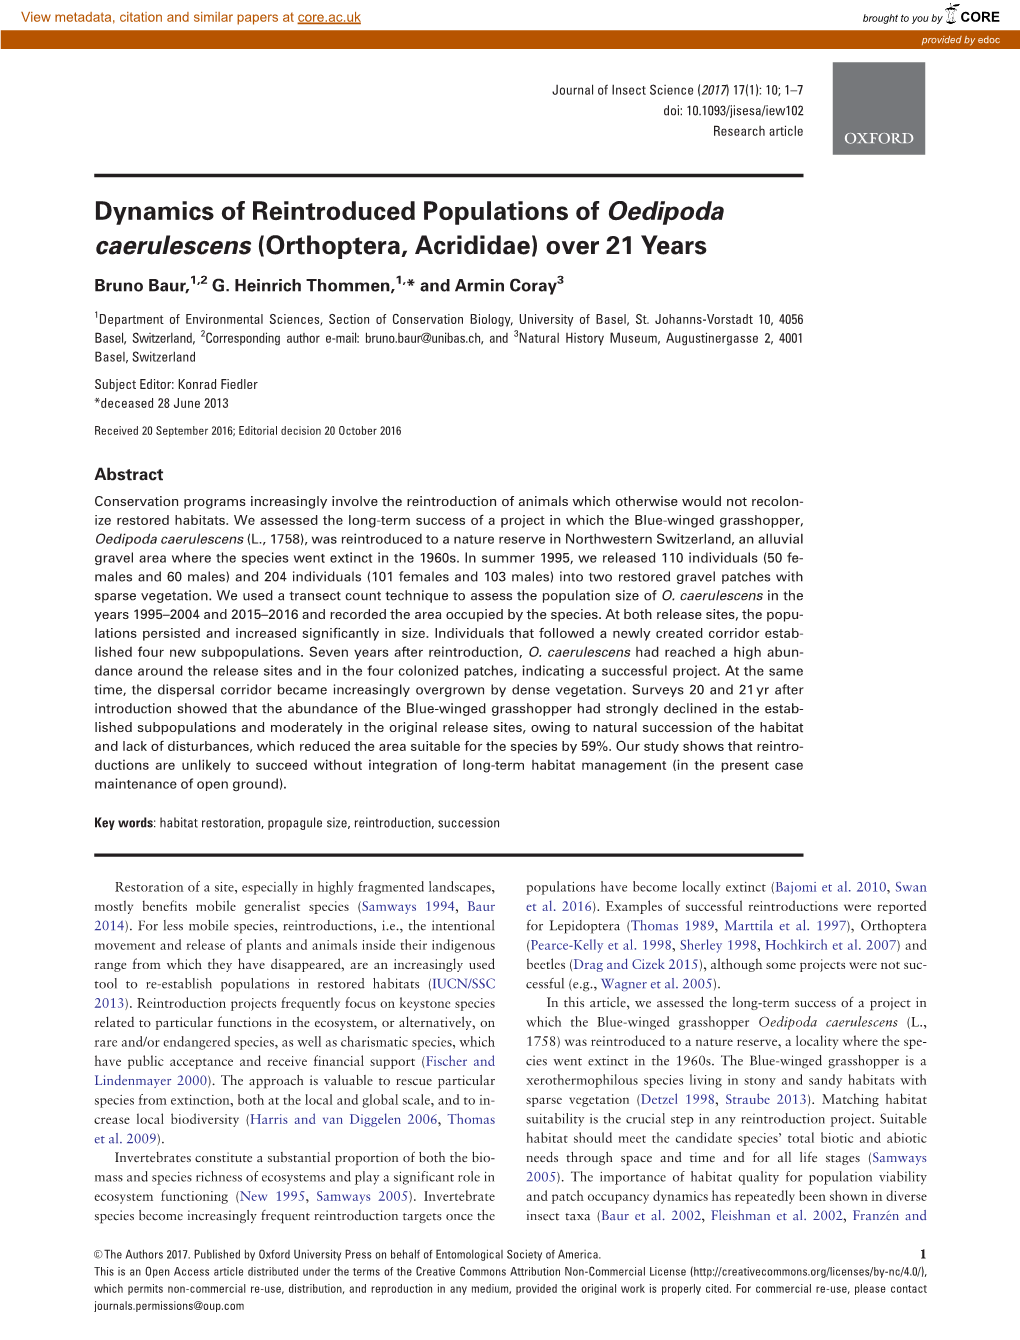 Dynamics of Reintroduced Populations of Oedipoda Caerulescens (Orthoptera, Acrididae) Over 21 Years